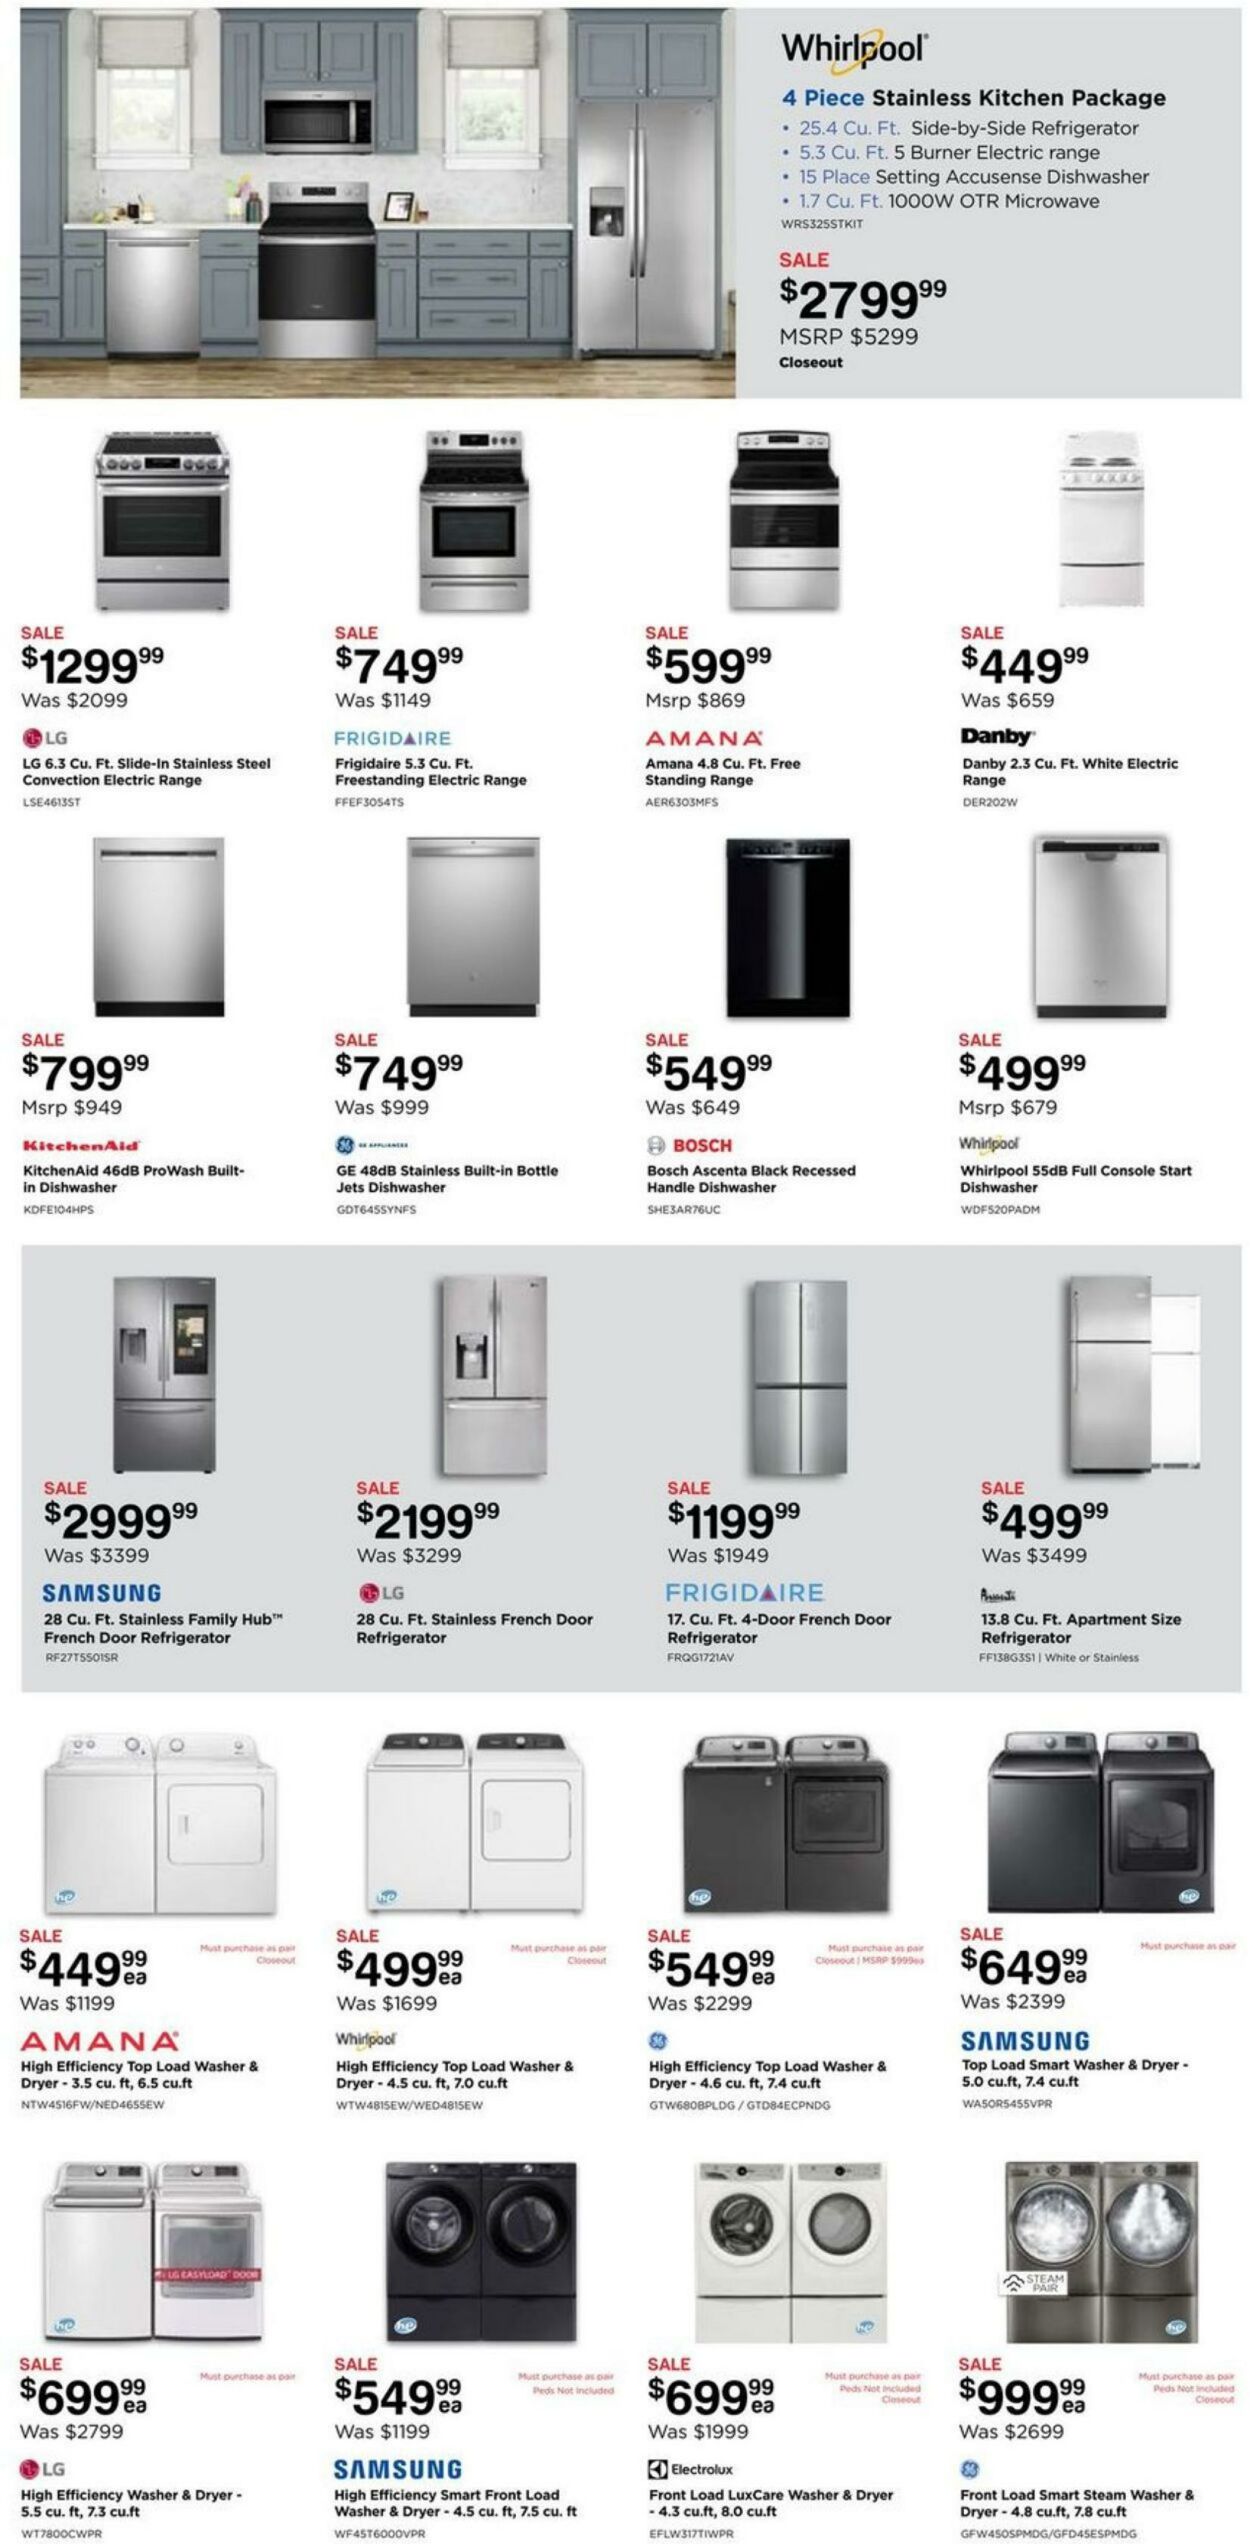 Weekly ad Electronic Express 07/31/2022 - 08/06/2022